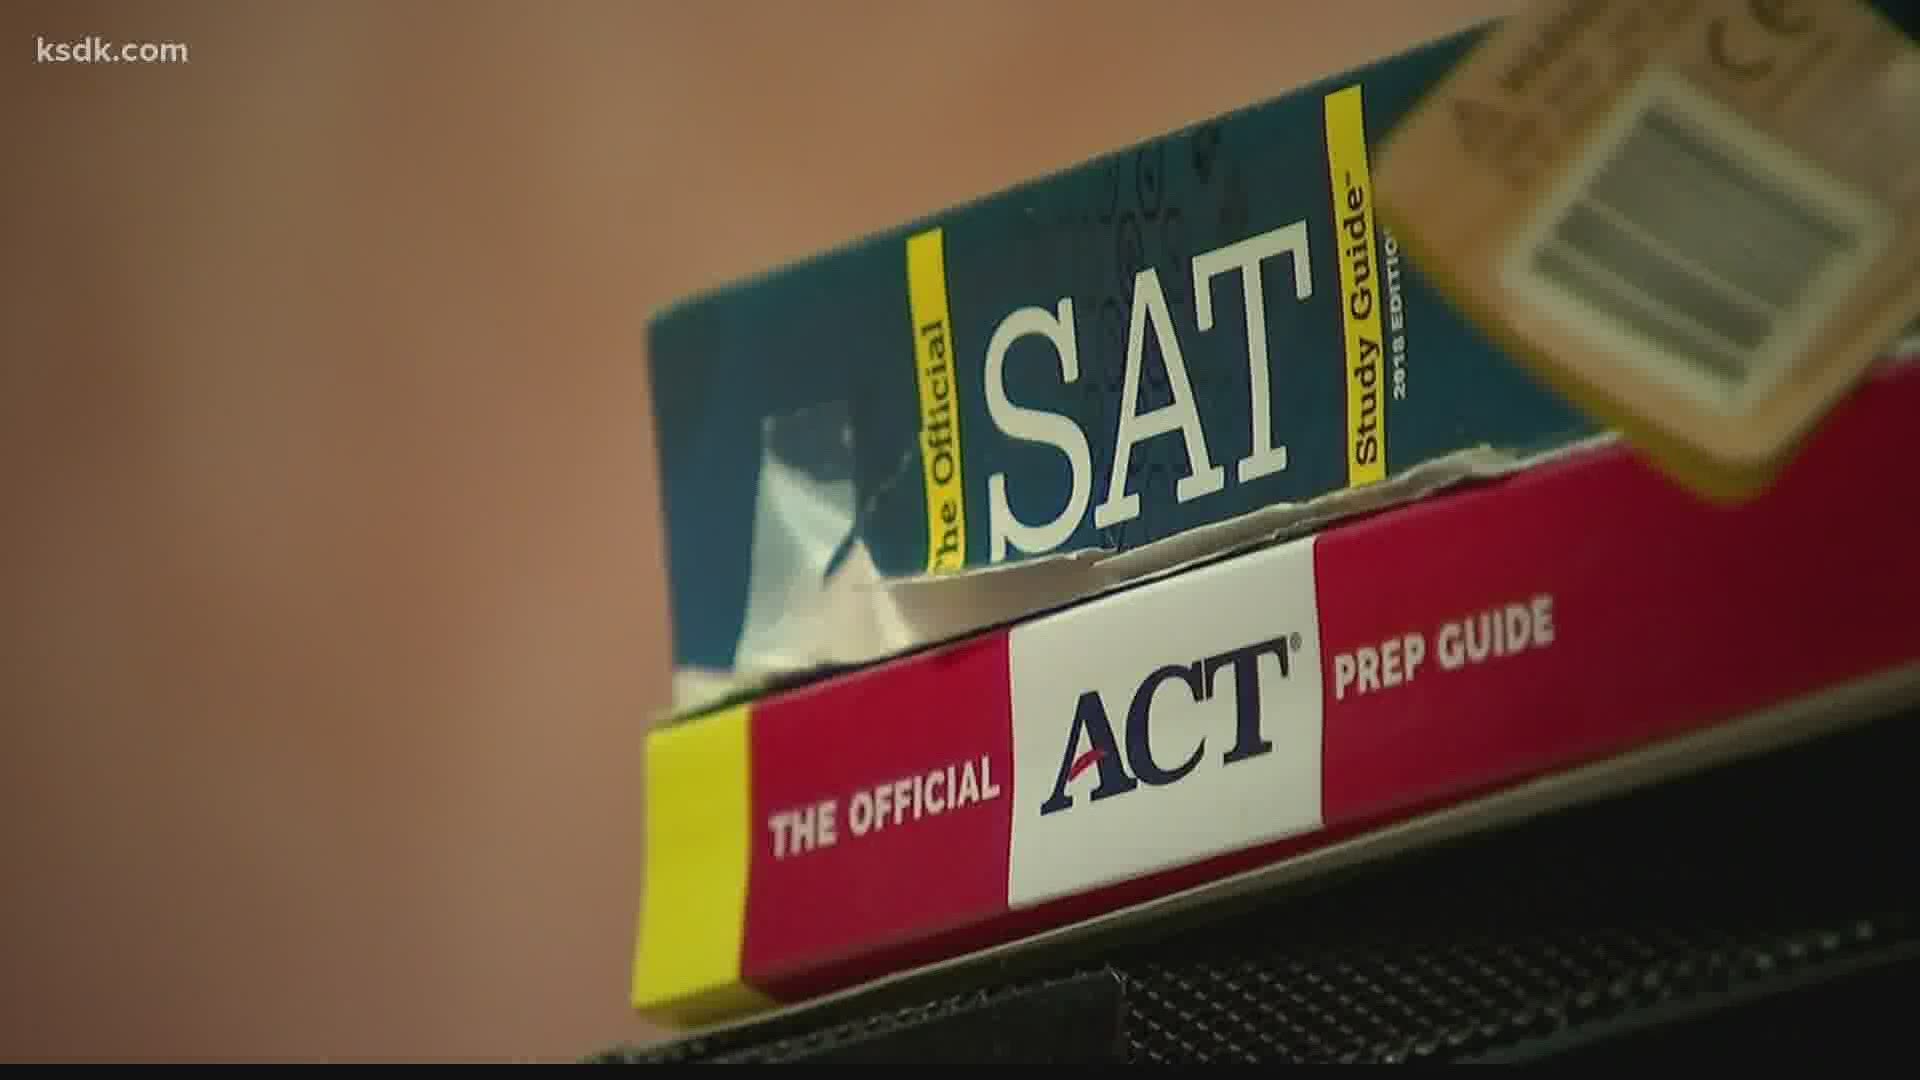 SIUE said it won’t require the ACT or SAT for the 2021 admissions. SIUC made a similar announcement earlier this week.